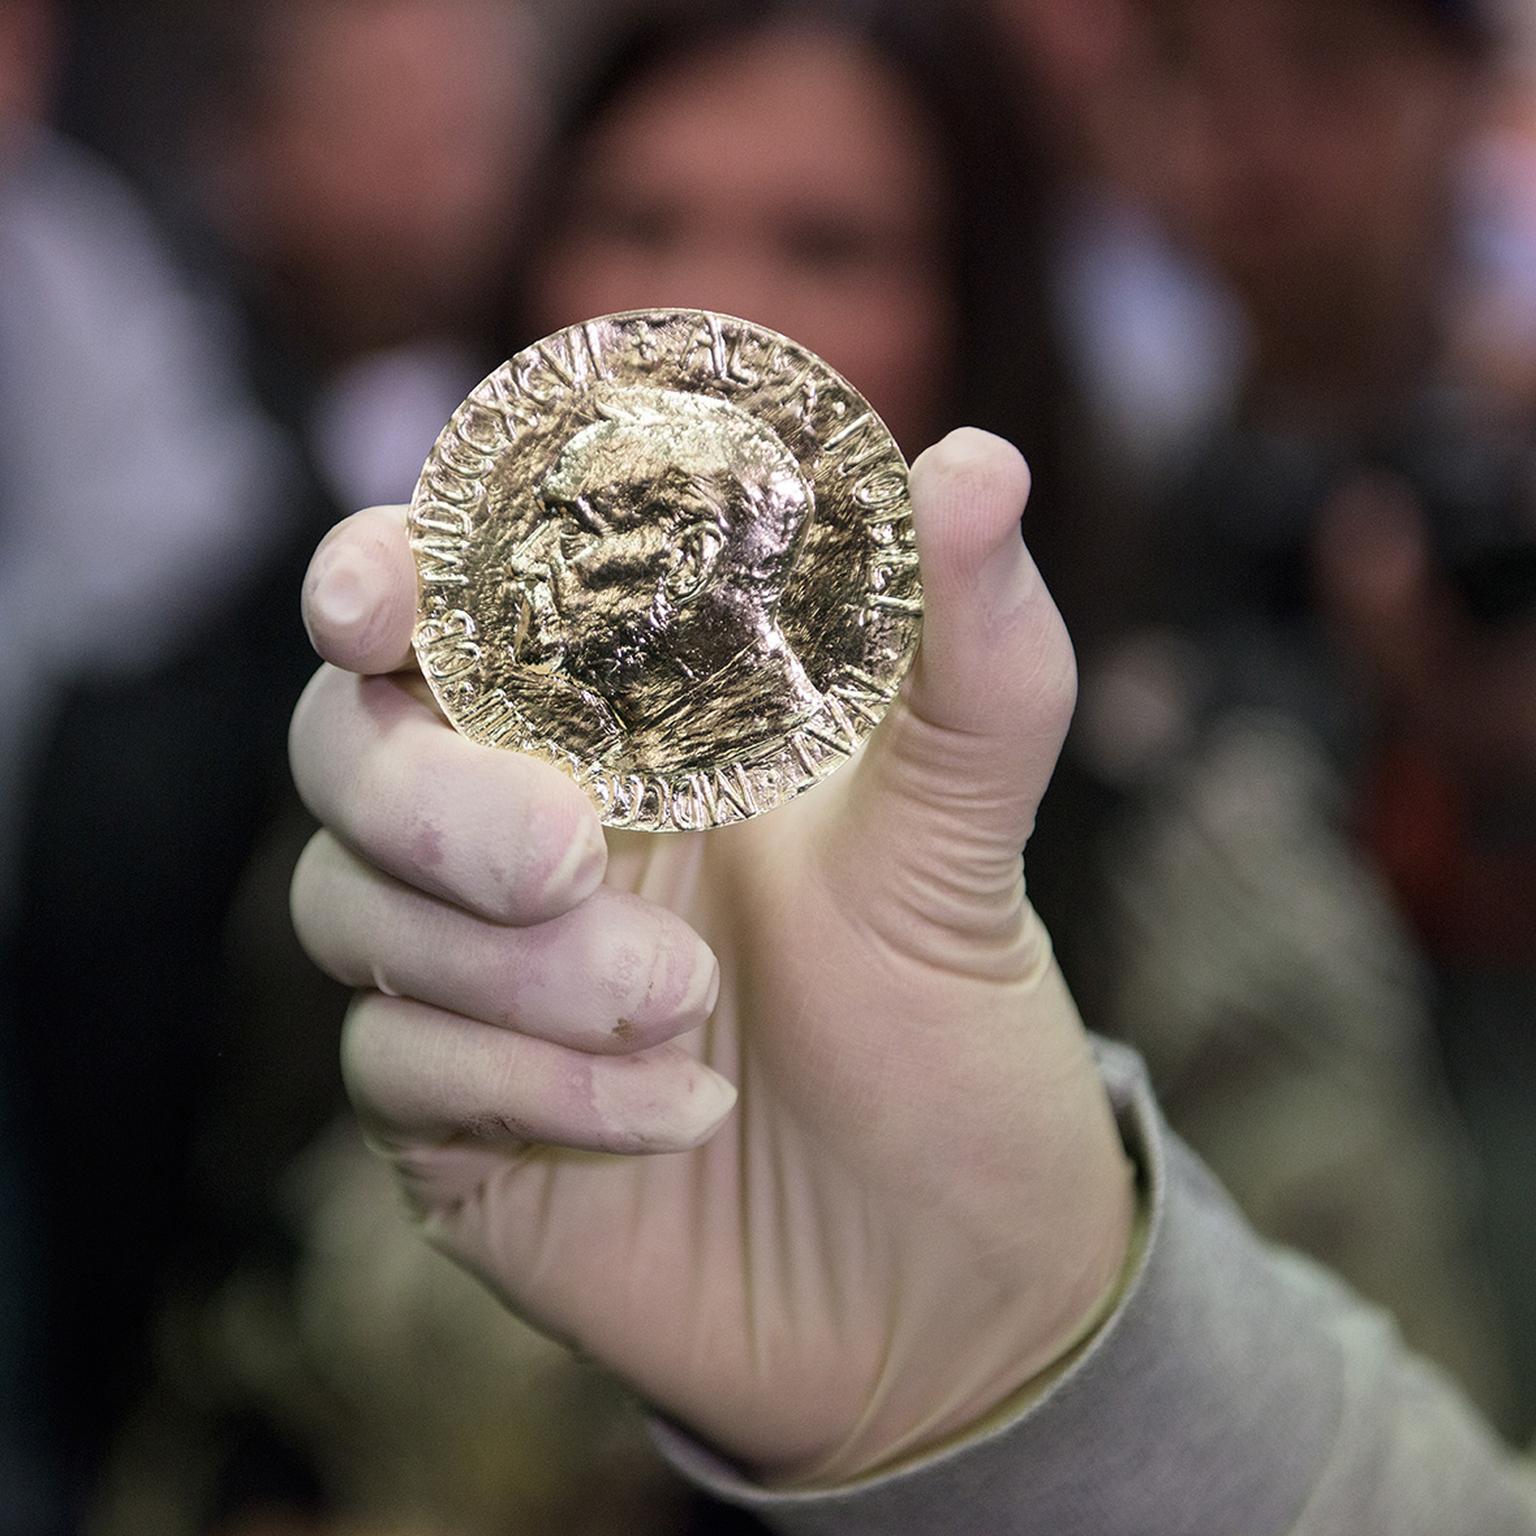 The 2015 Nobel Peace Prize in Fairmined gold